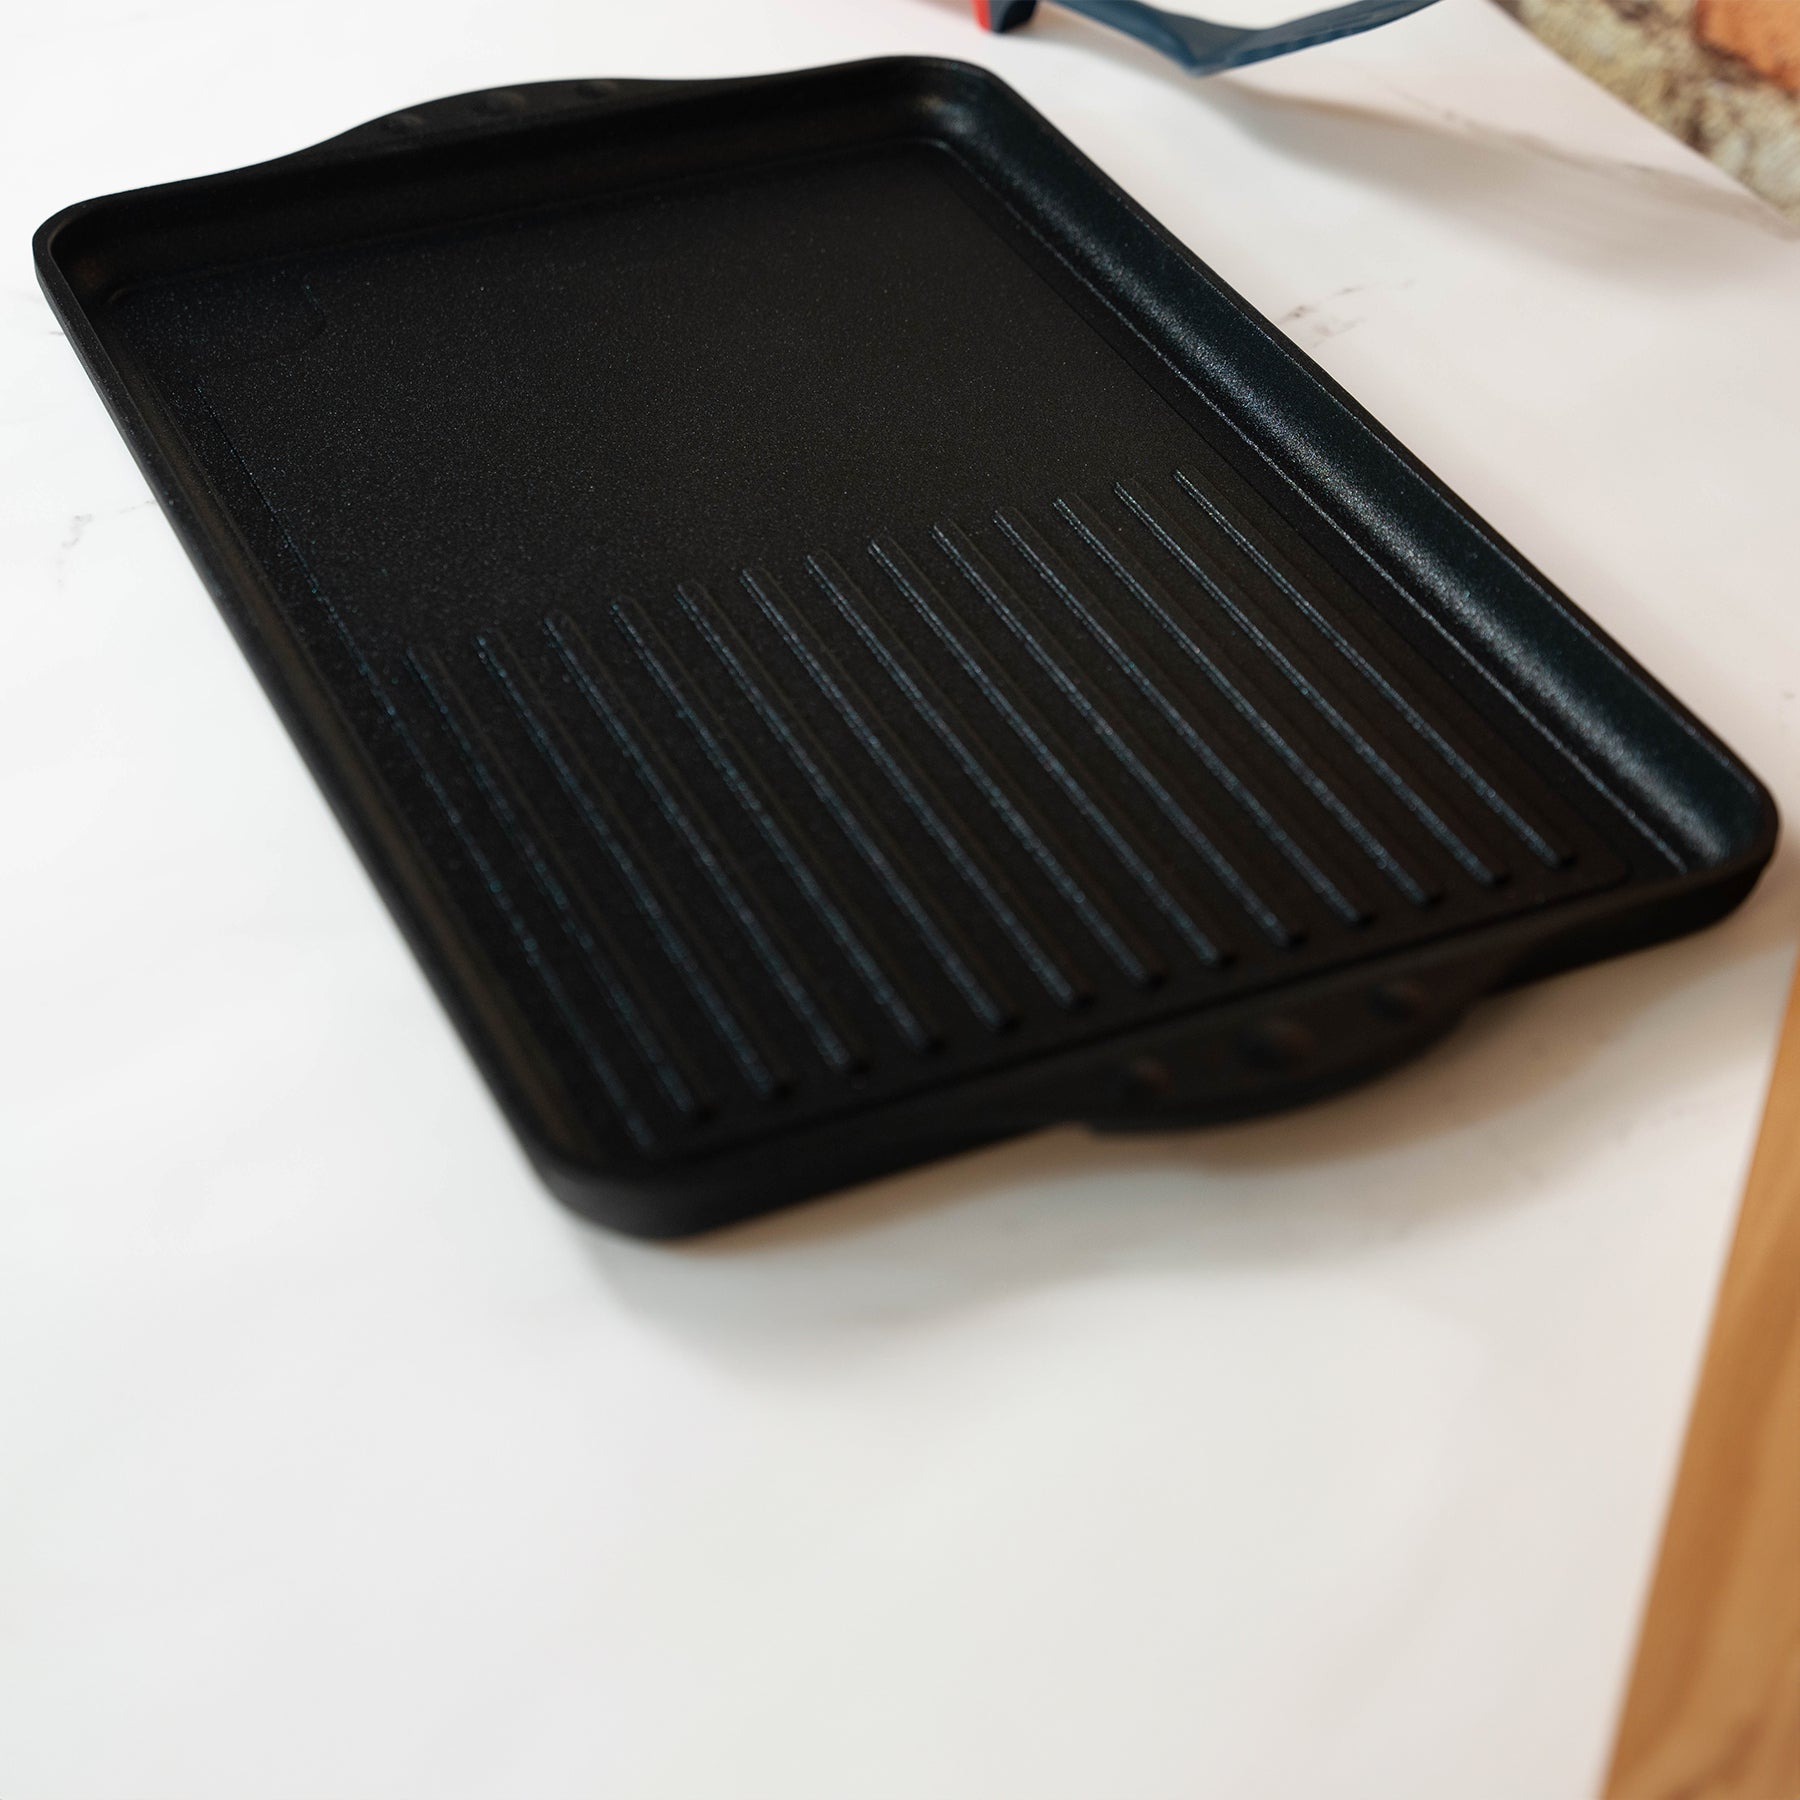 XD Nonstick 17" x 11" Double-Burner Grill/Griddle Combo in use on kitchen counter